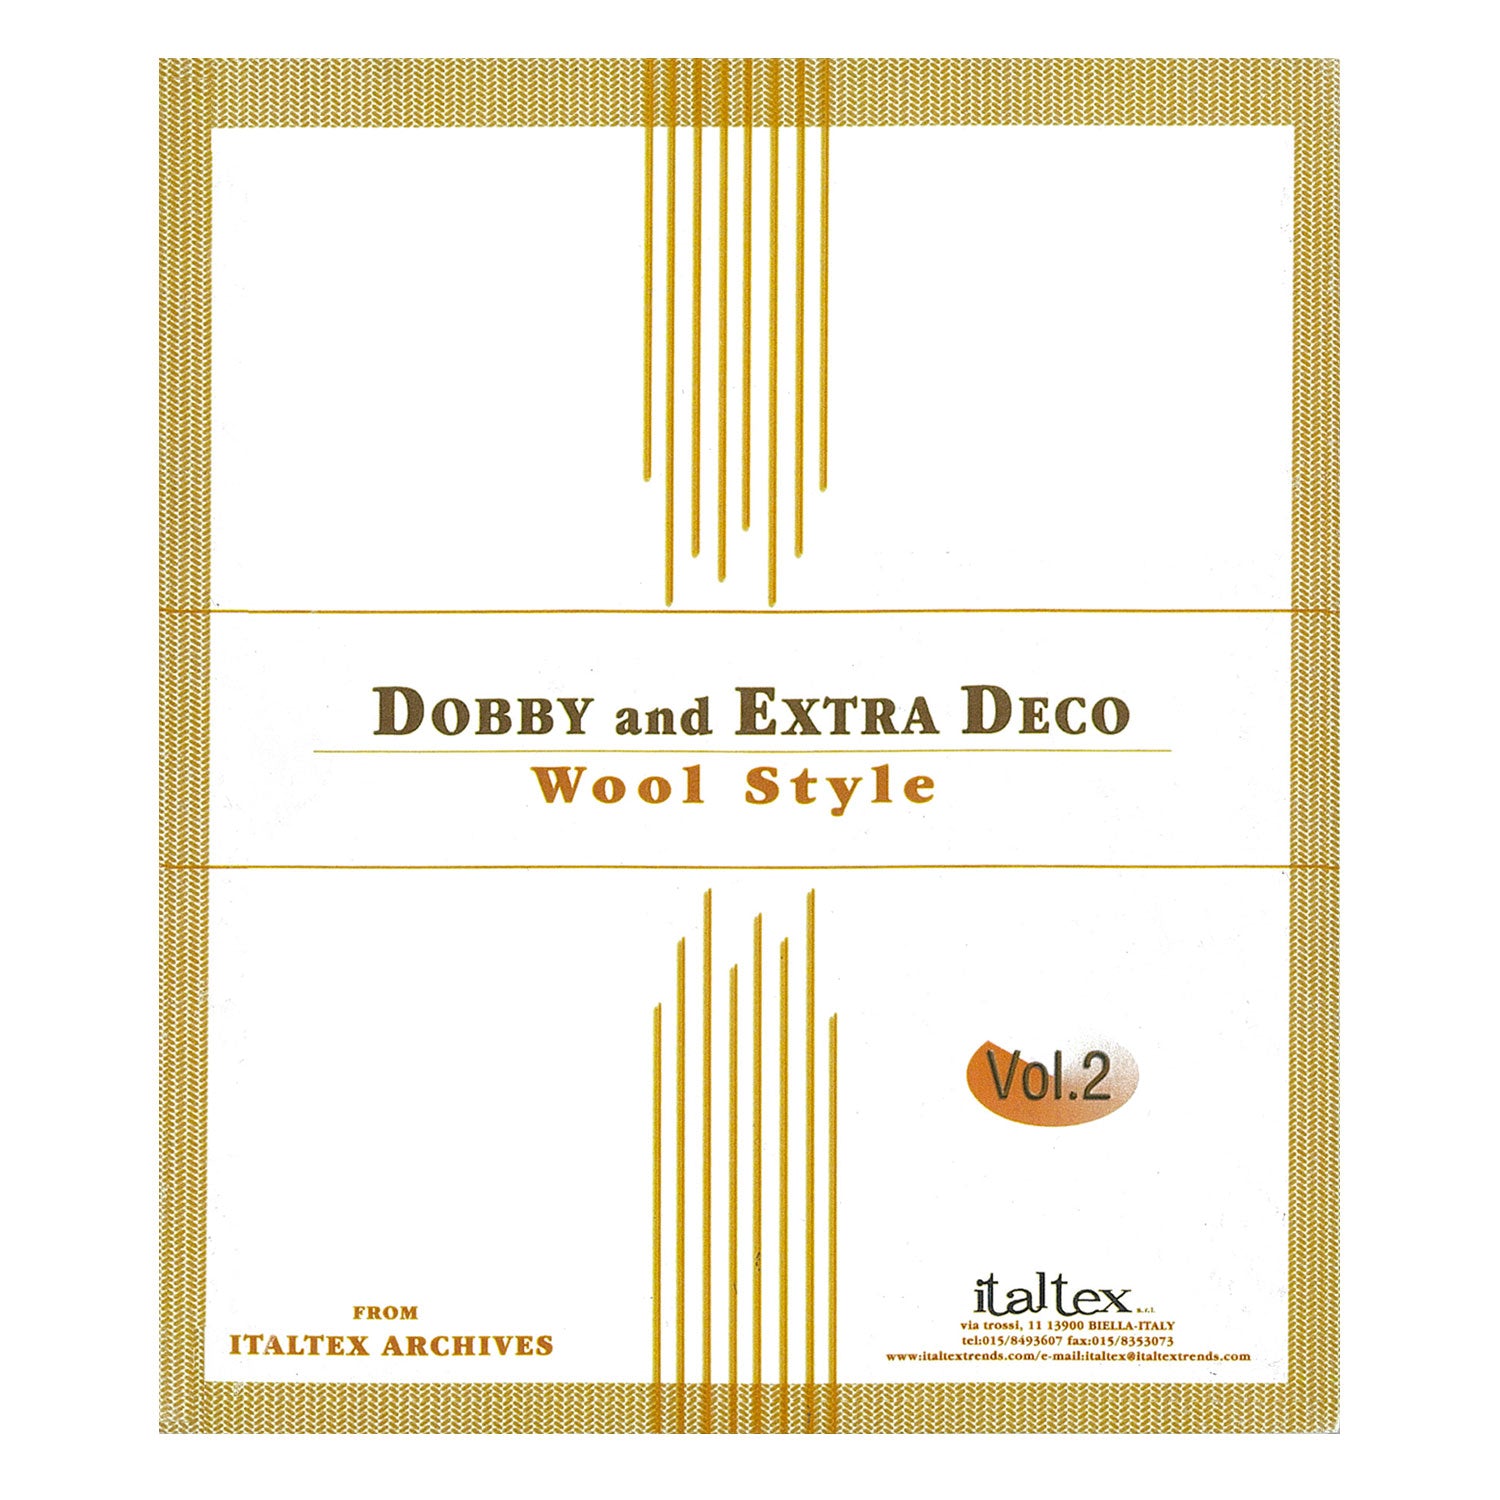 DOBBY and EXTRA DECO (wool style) Vol 2